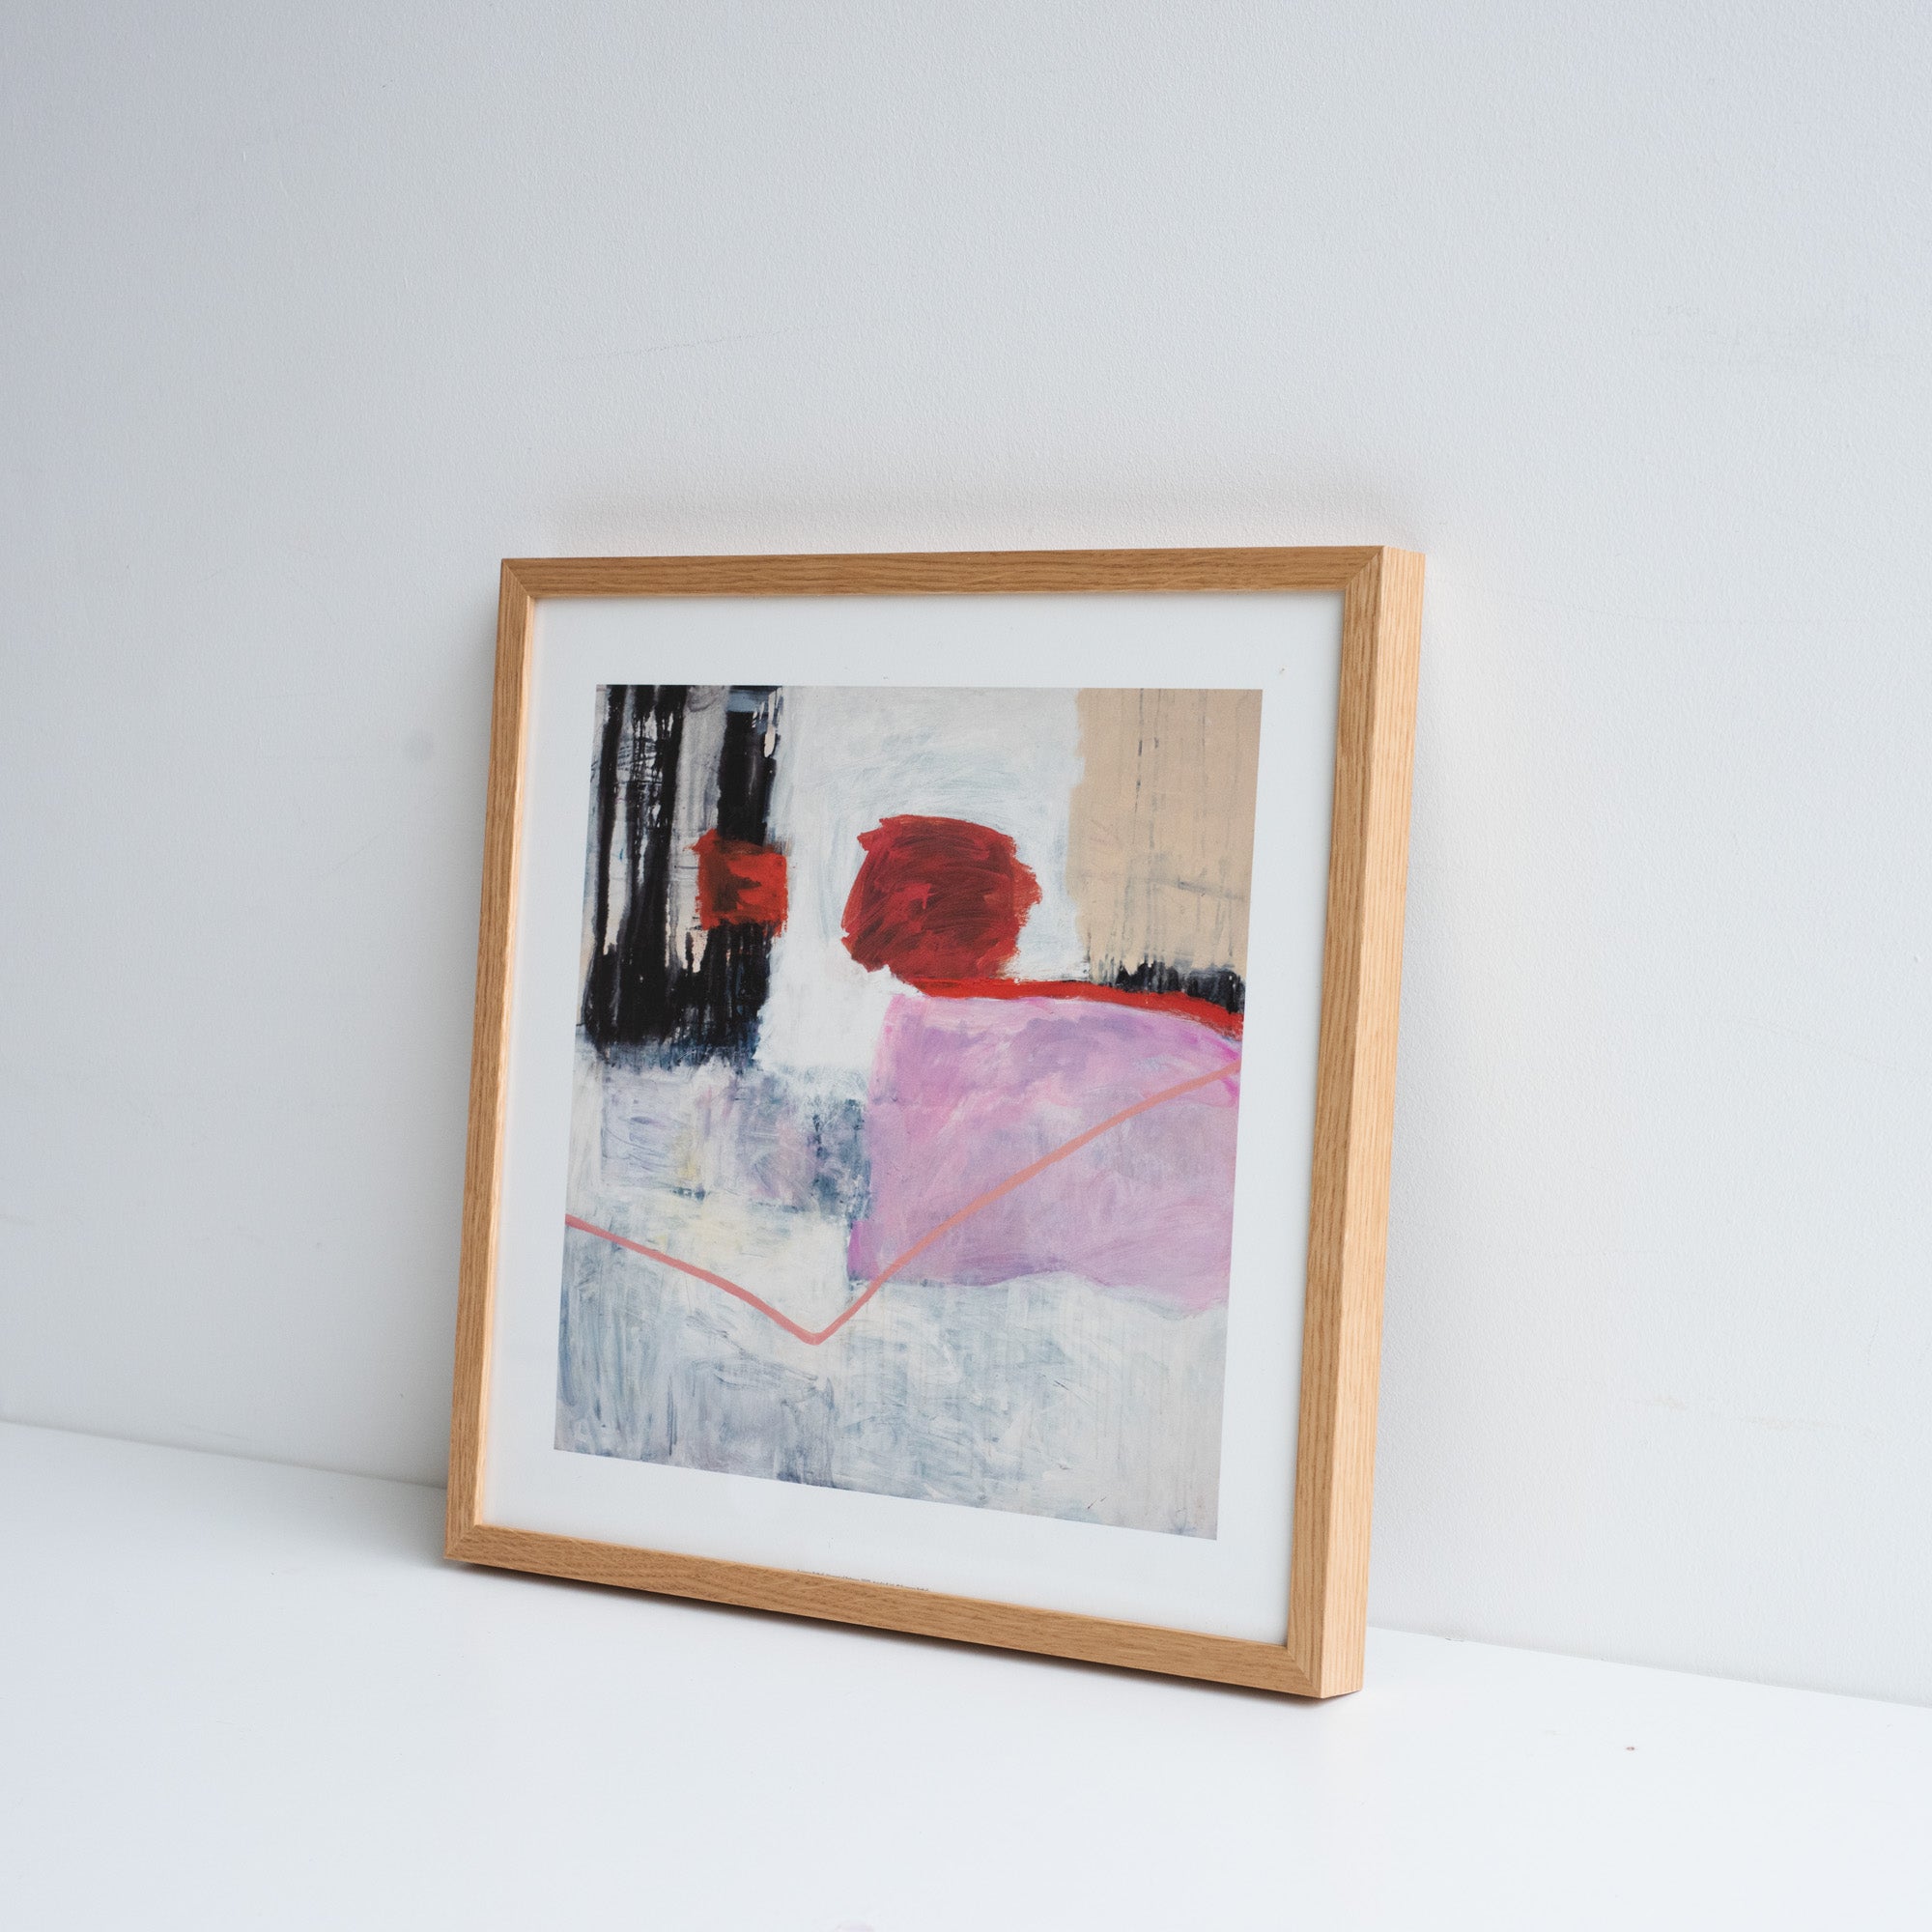 Reproduction of an abstract painting by Suzanne Bethell in an ash frame, rested against a white wall.